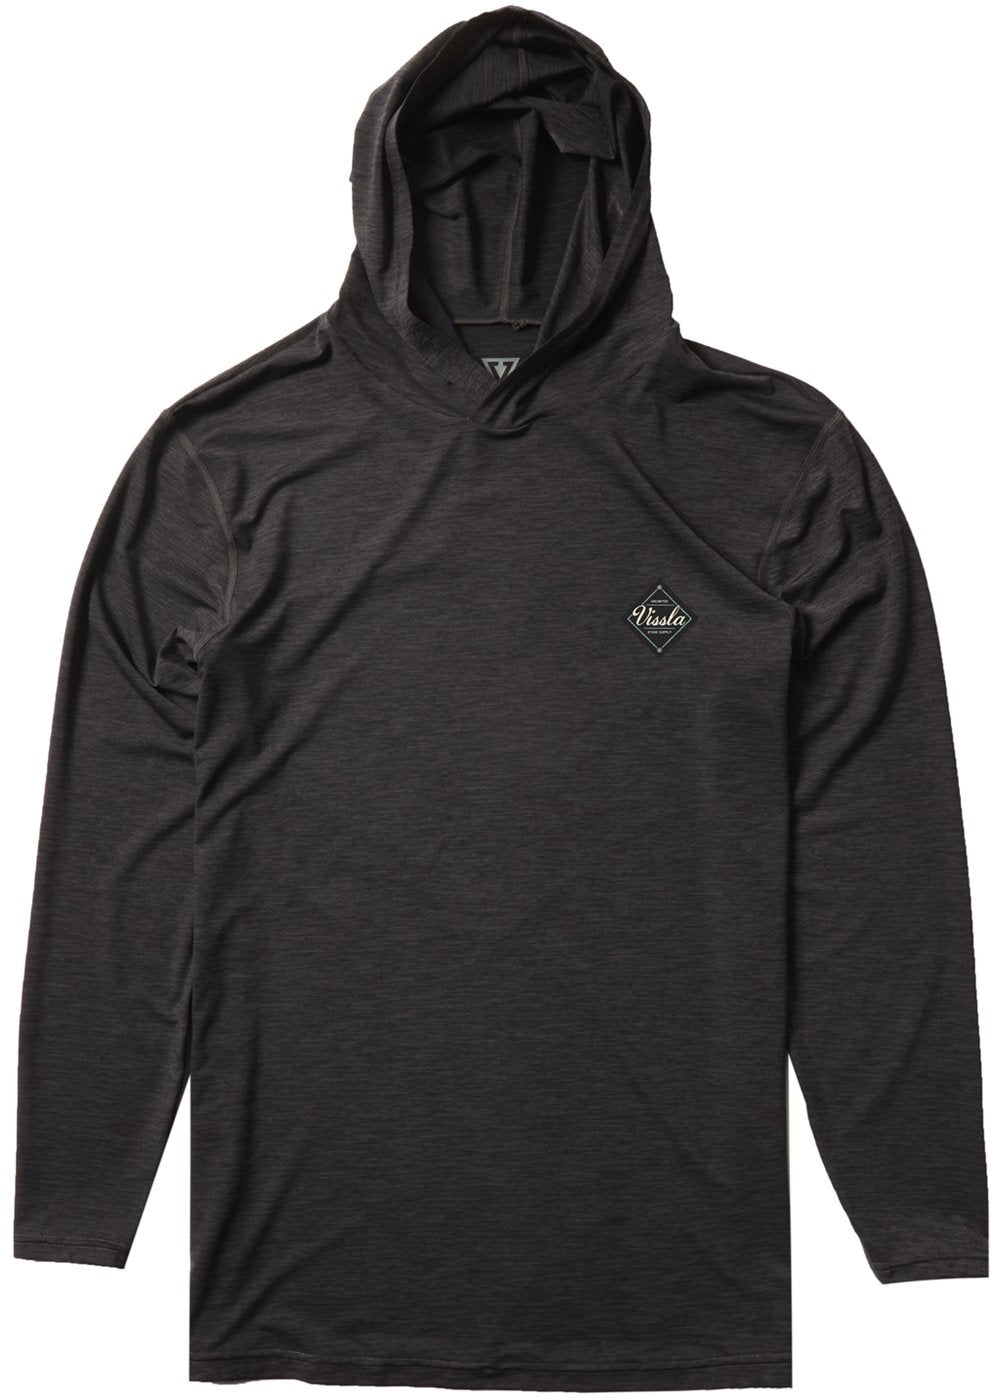 Vissla Men's black Twisted Eco Hooded Long Sleeve Rash Guard with a diamond and the word Vissla in the middle